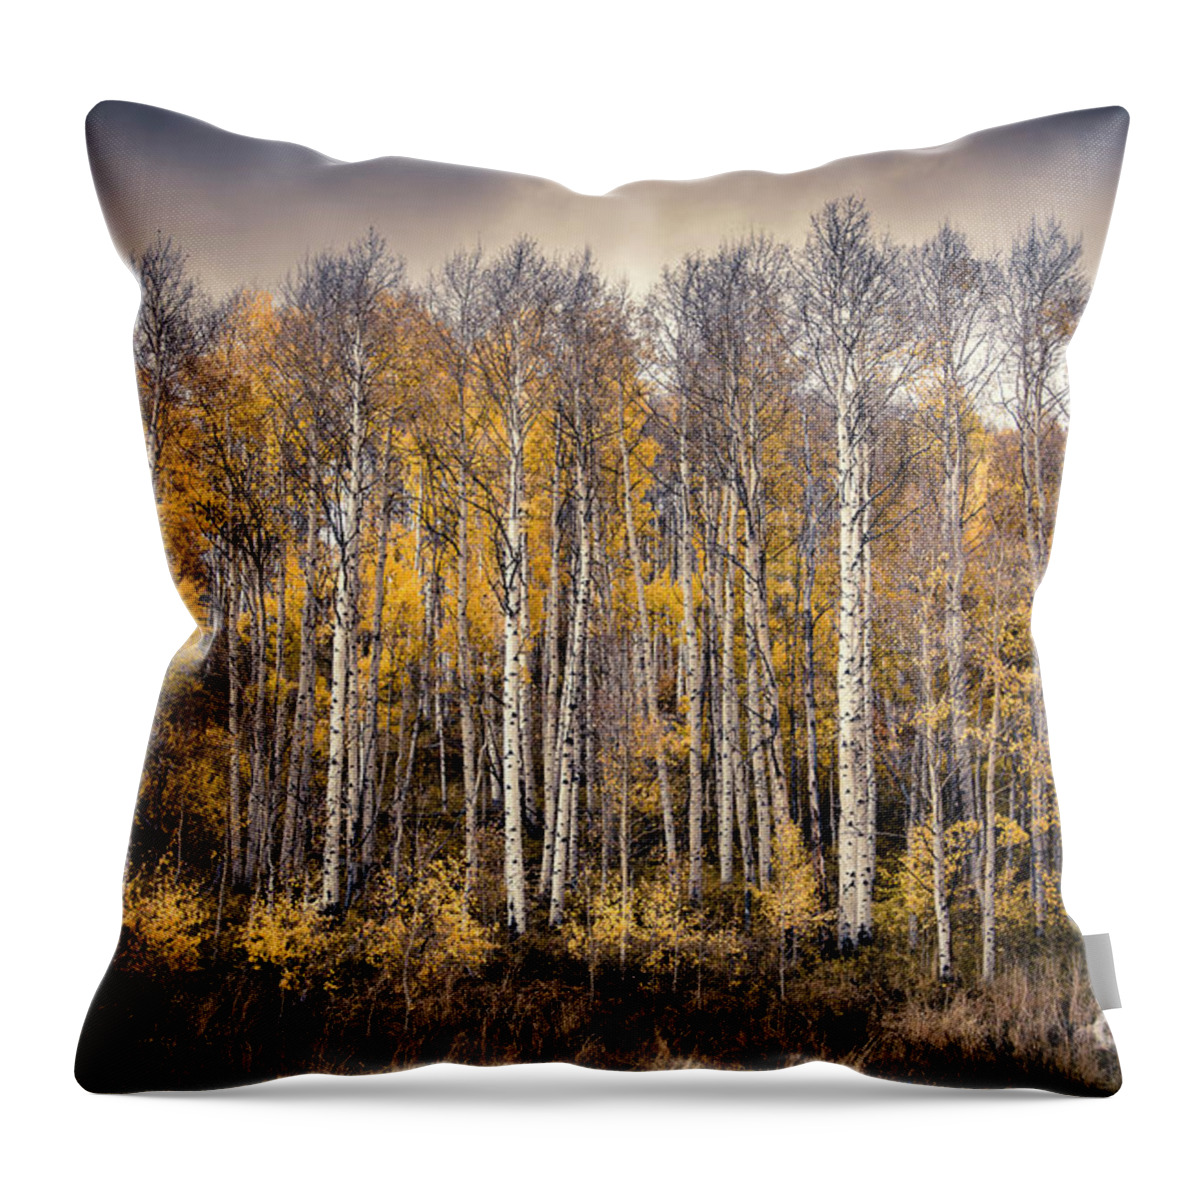 Aspen Trees Throw Pillow featuring the photograph Late Fall by The Forests Edge Photography - Diane Sandoval